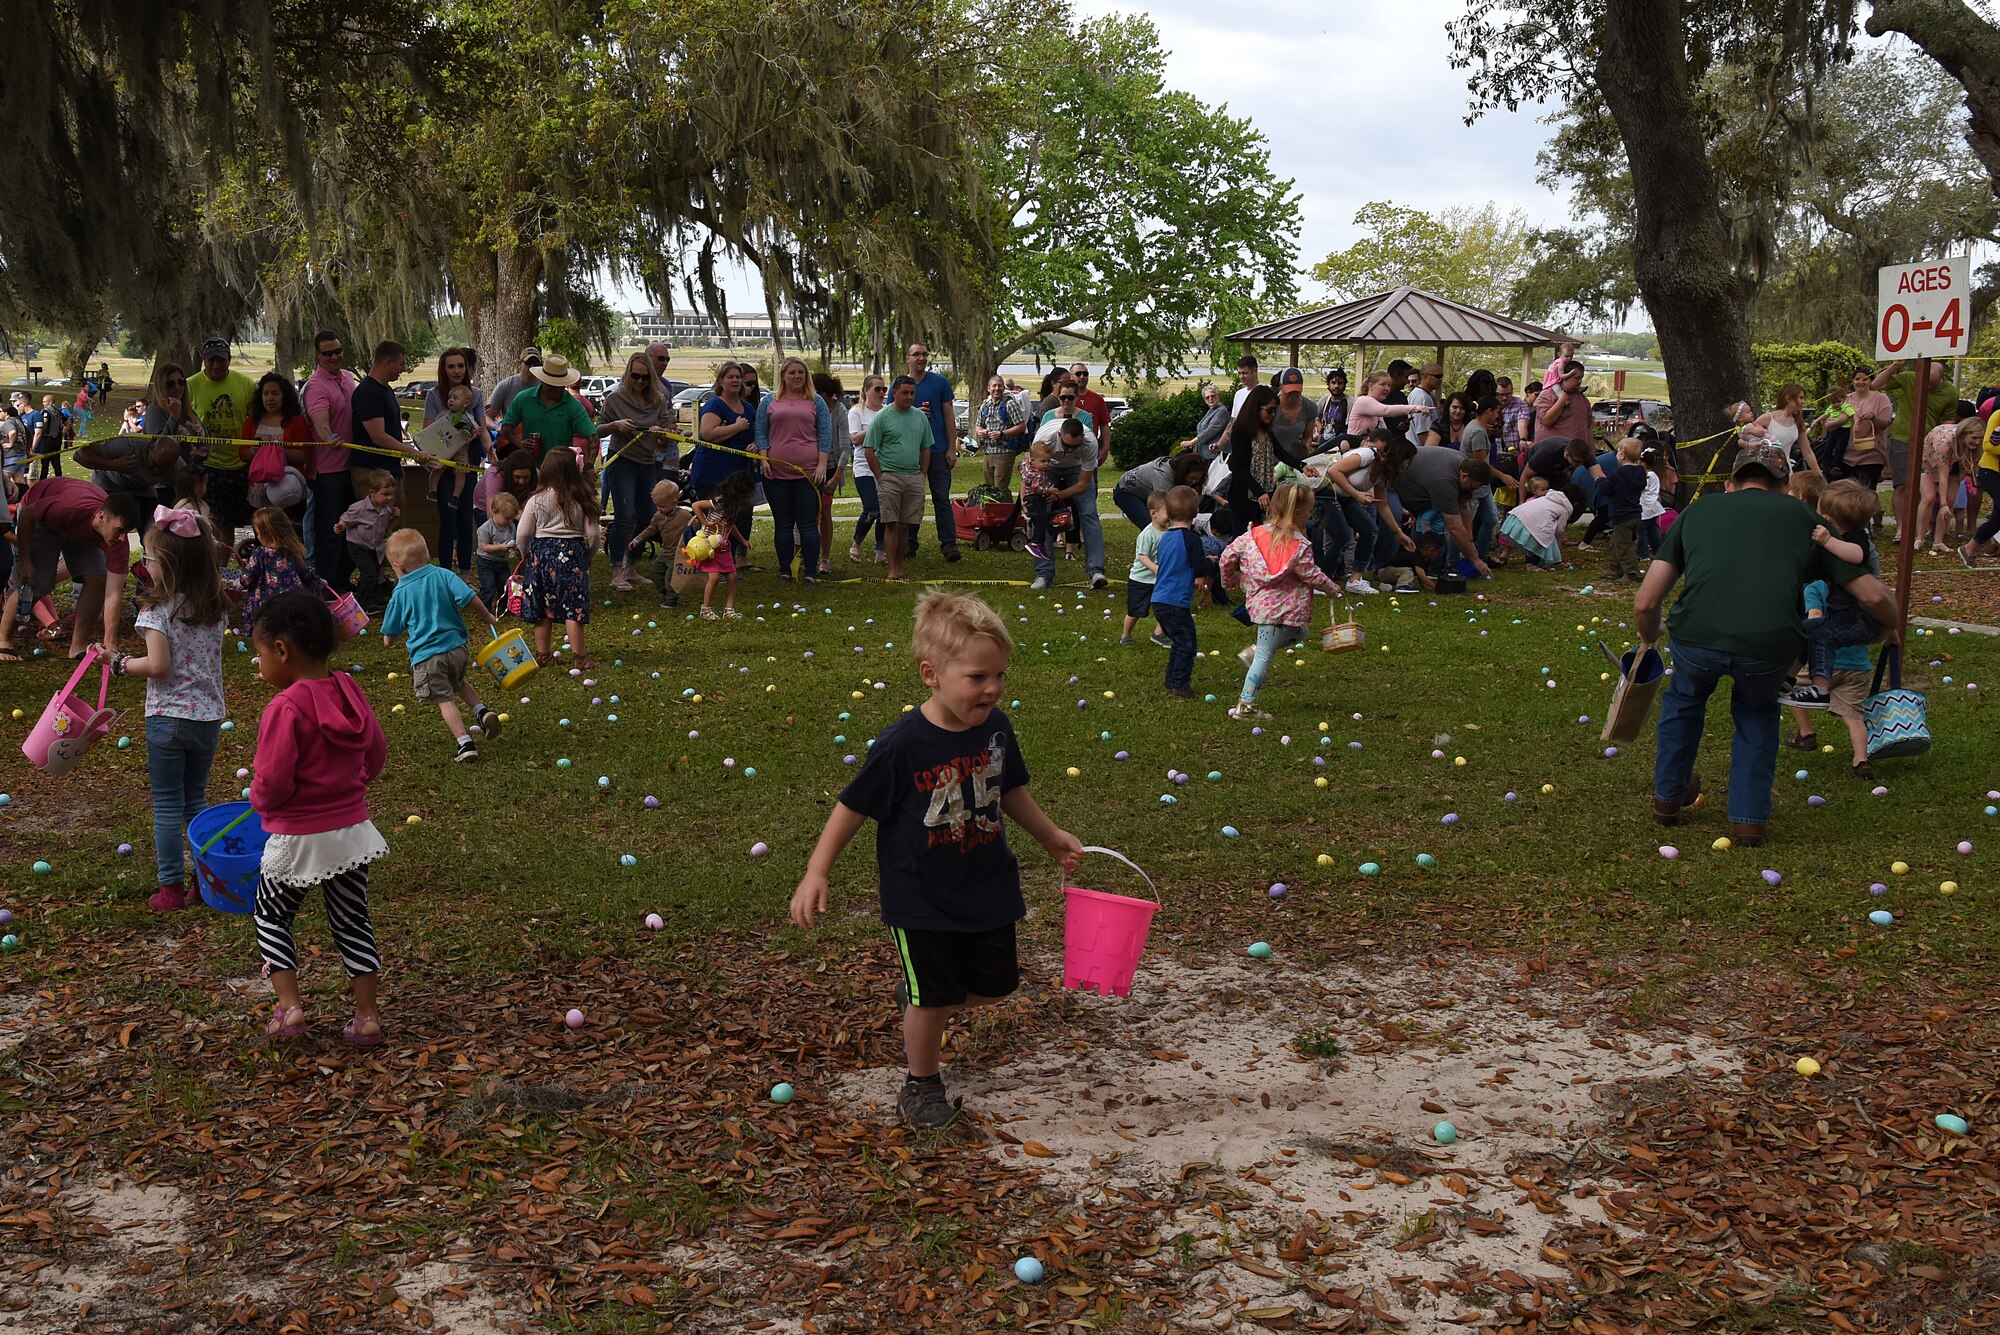 Keesler children participate in an Easter egg hunt during Easter in the Park at Marina Park March 24, 2018, on Keesler Air Force Base, Mississippi. The event festivities also included a parade, arts and crafts and informational booths. (U.S. Air Force photo by Airman 1st Class Suzie Plotnikov)